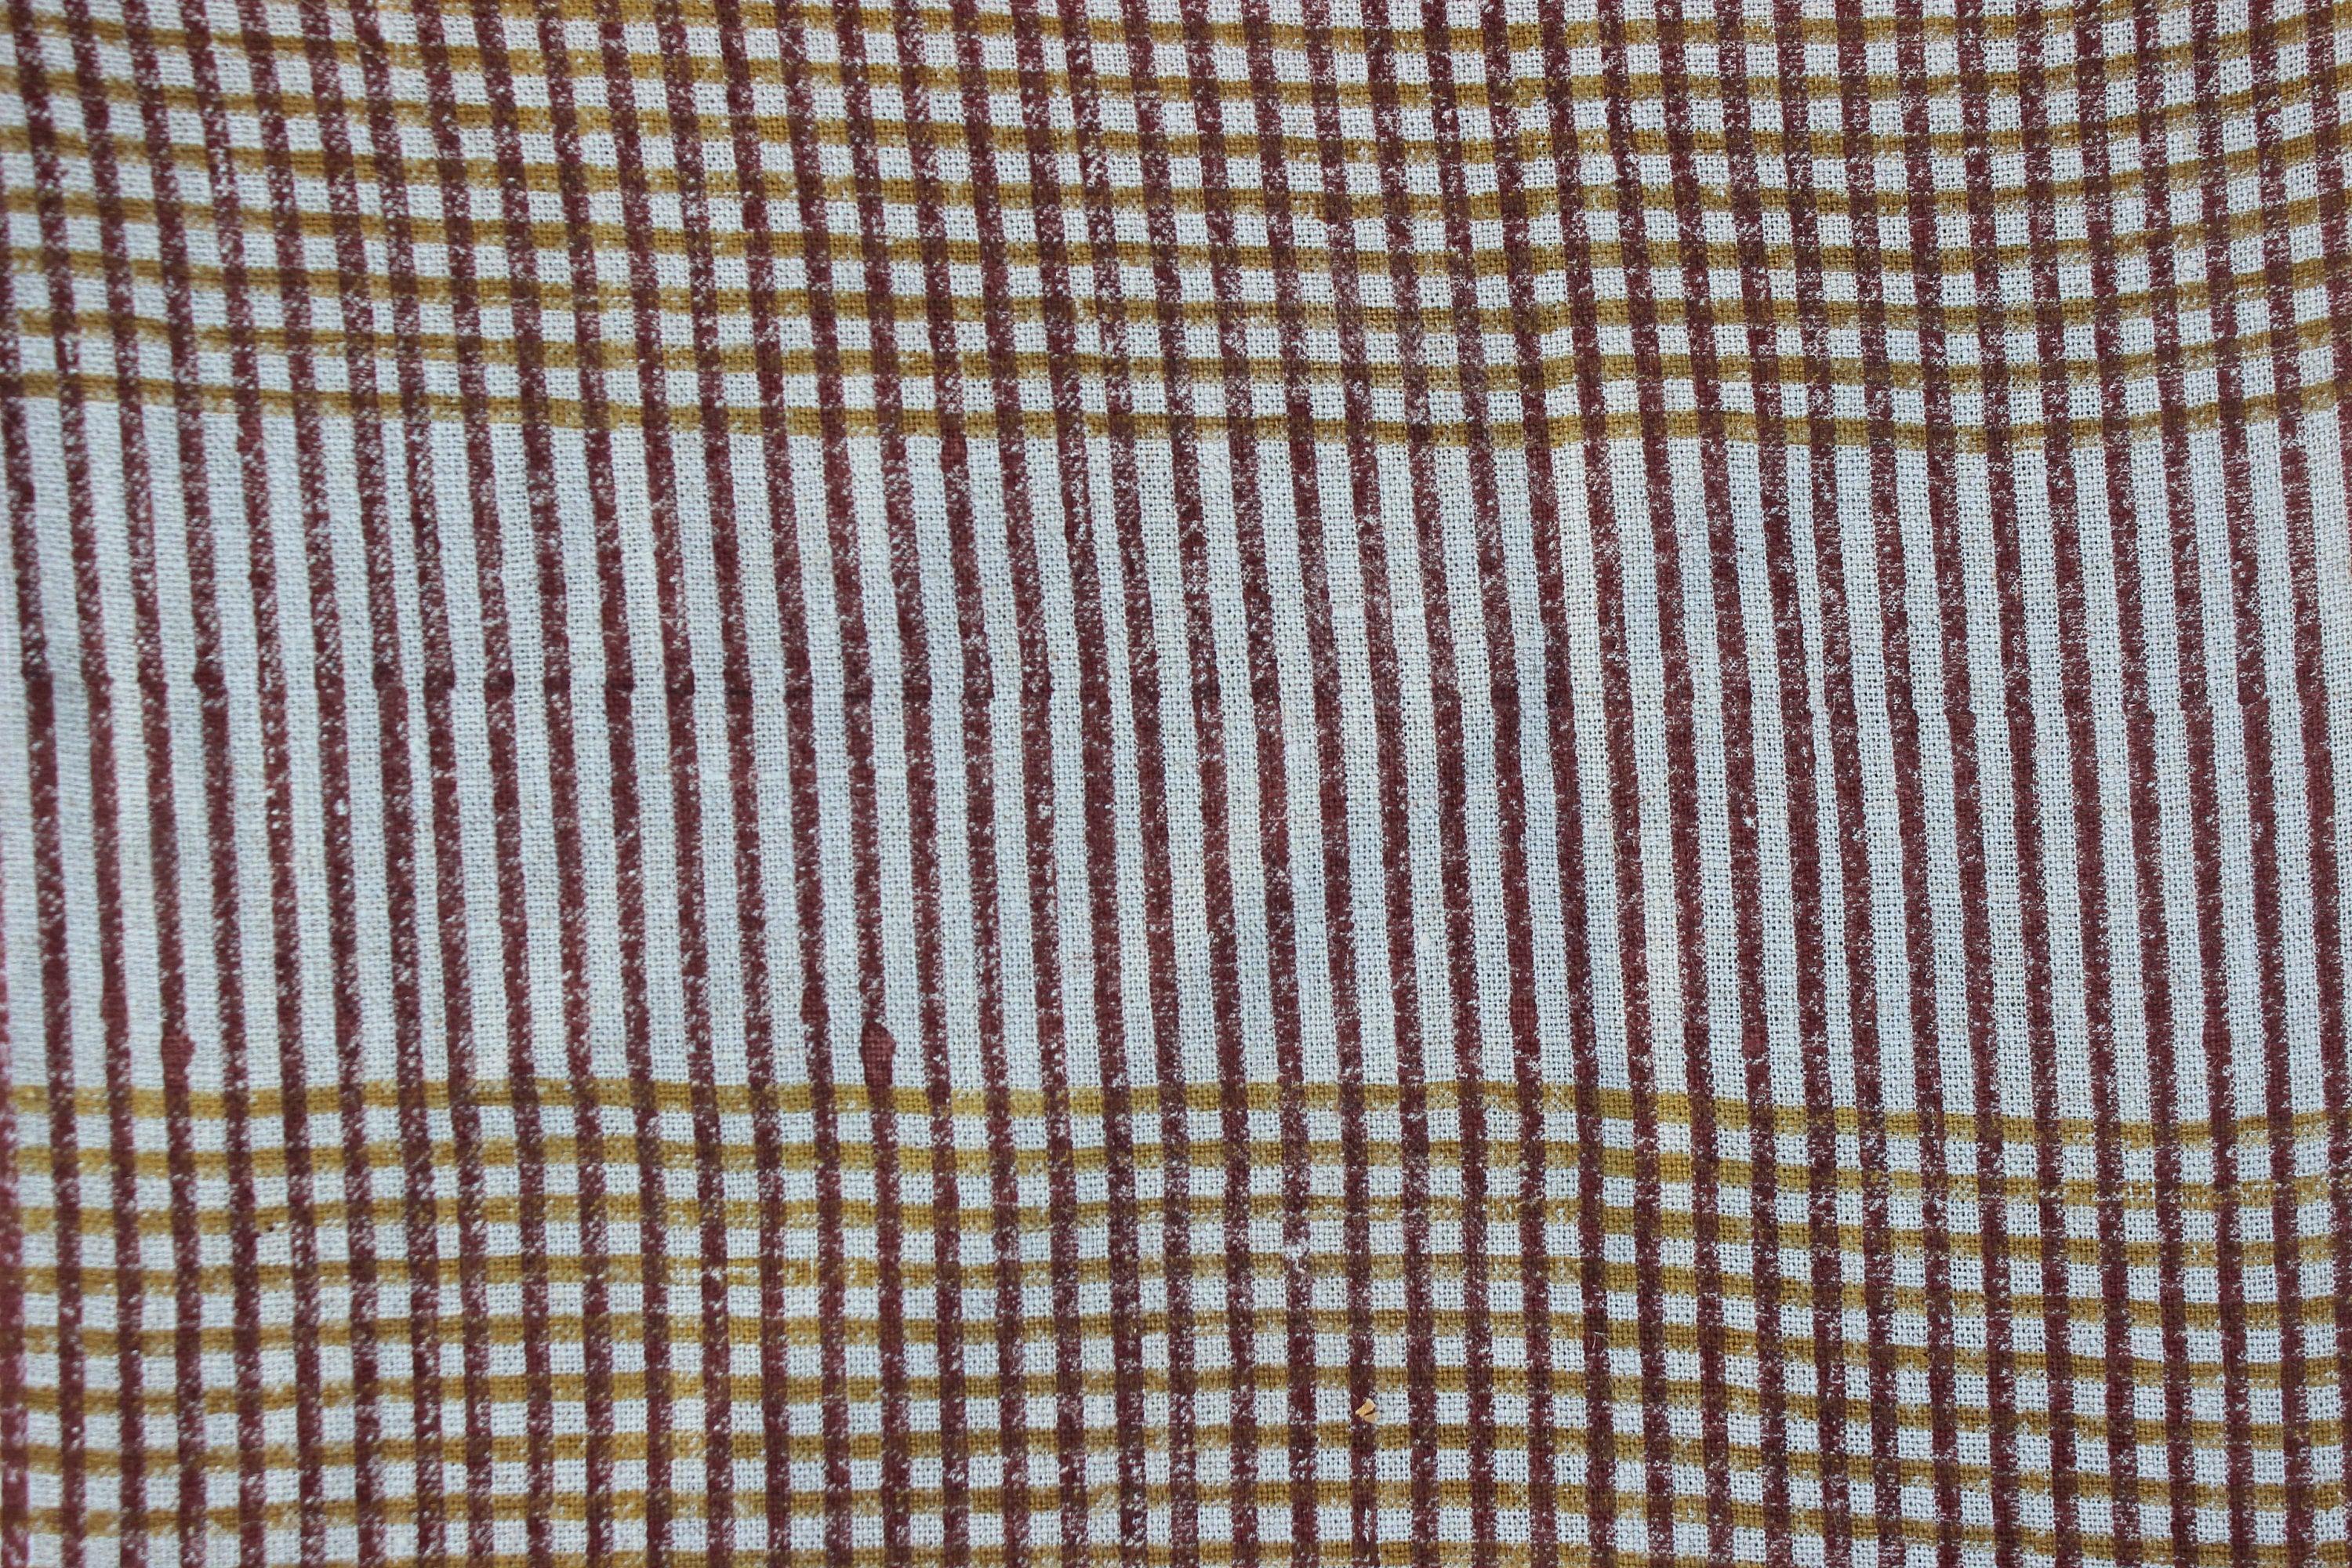 Amayra Mustard  Block Print Check Fabric,Heavy Linen Fabric, Wide Fabric By The Yard, Fabric Make Cushion Covers,Curtains,Tablecloth 